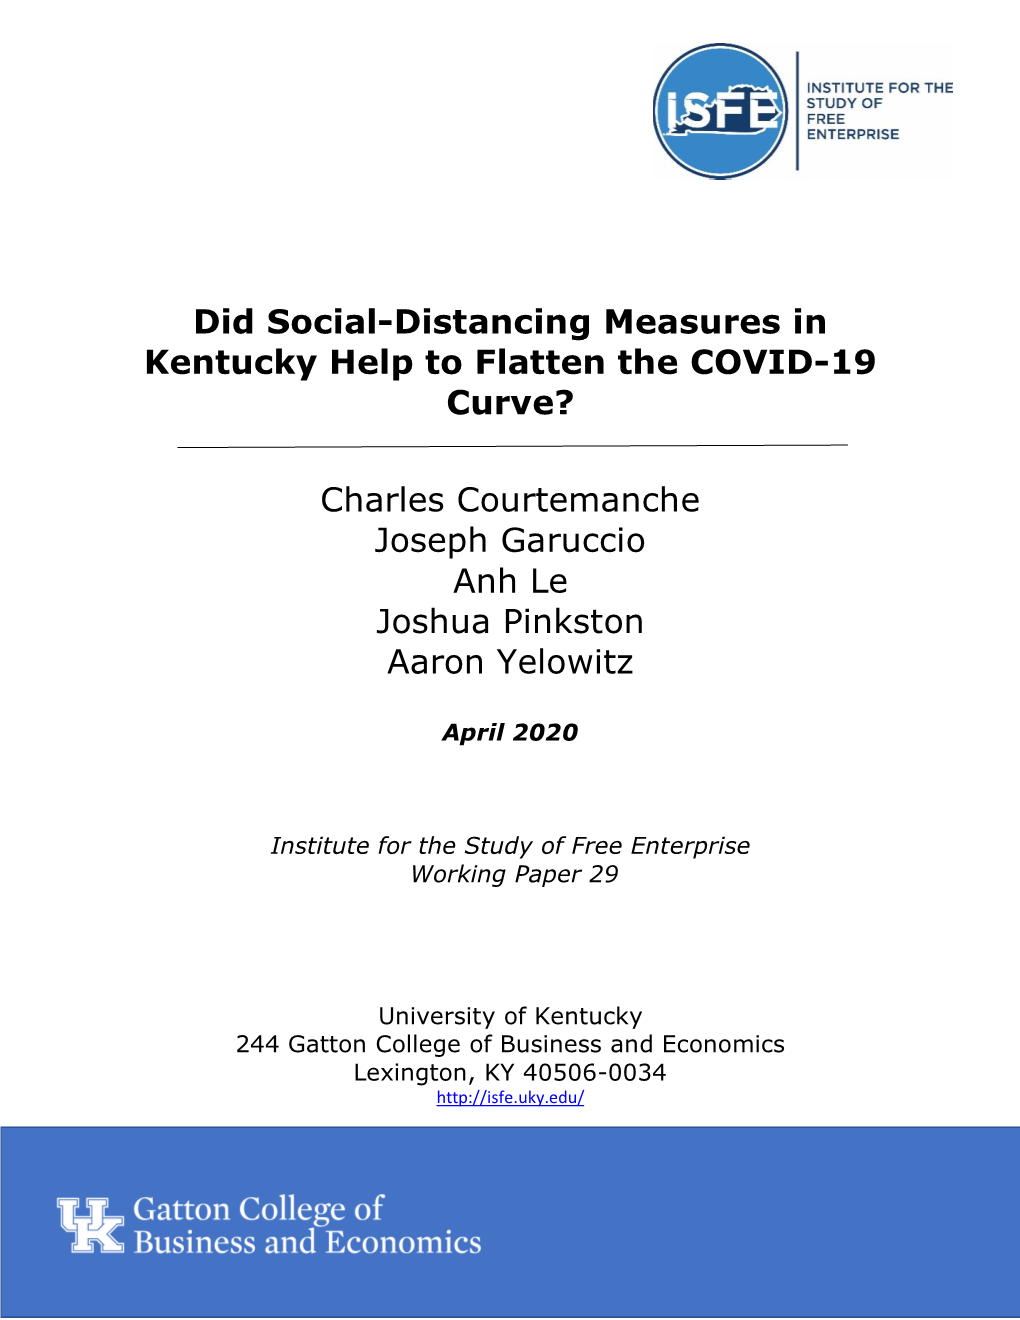 Did Social-Distancing Measures in Kentucky Help to Flatten the COVID-19 Curve?